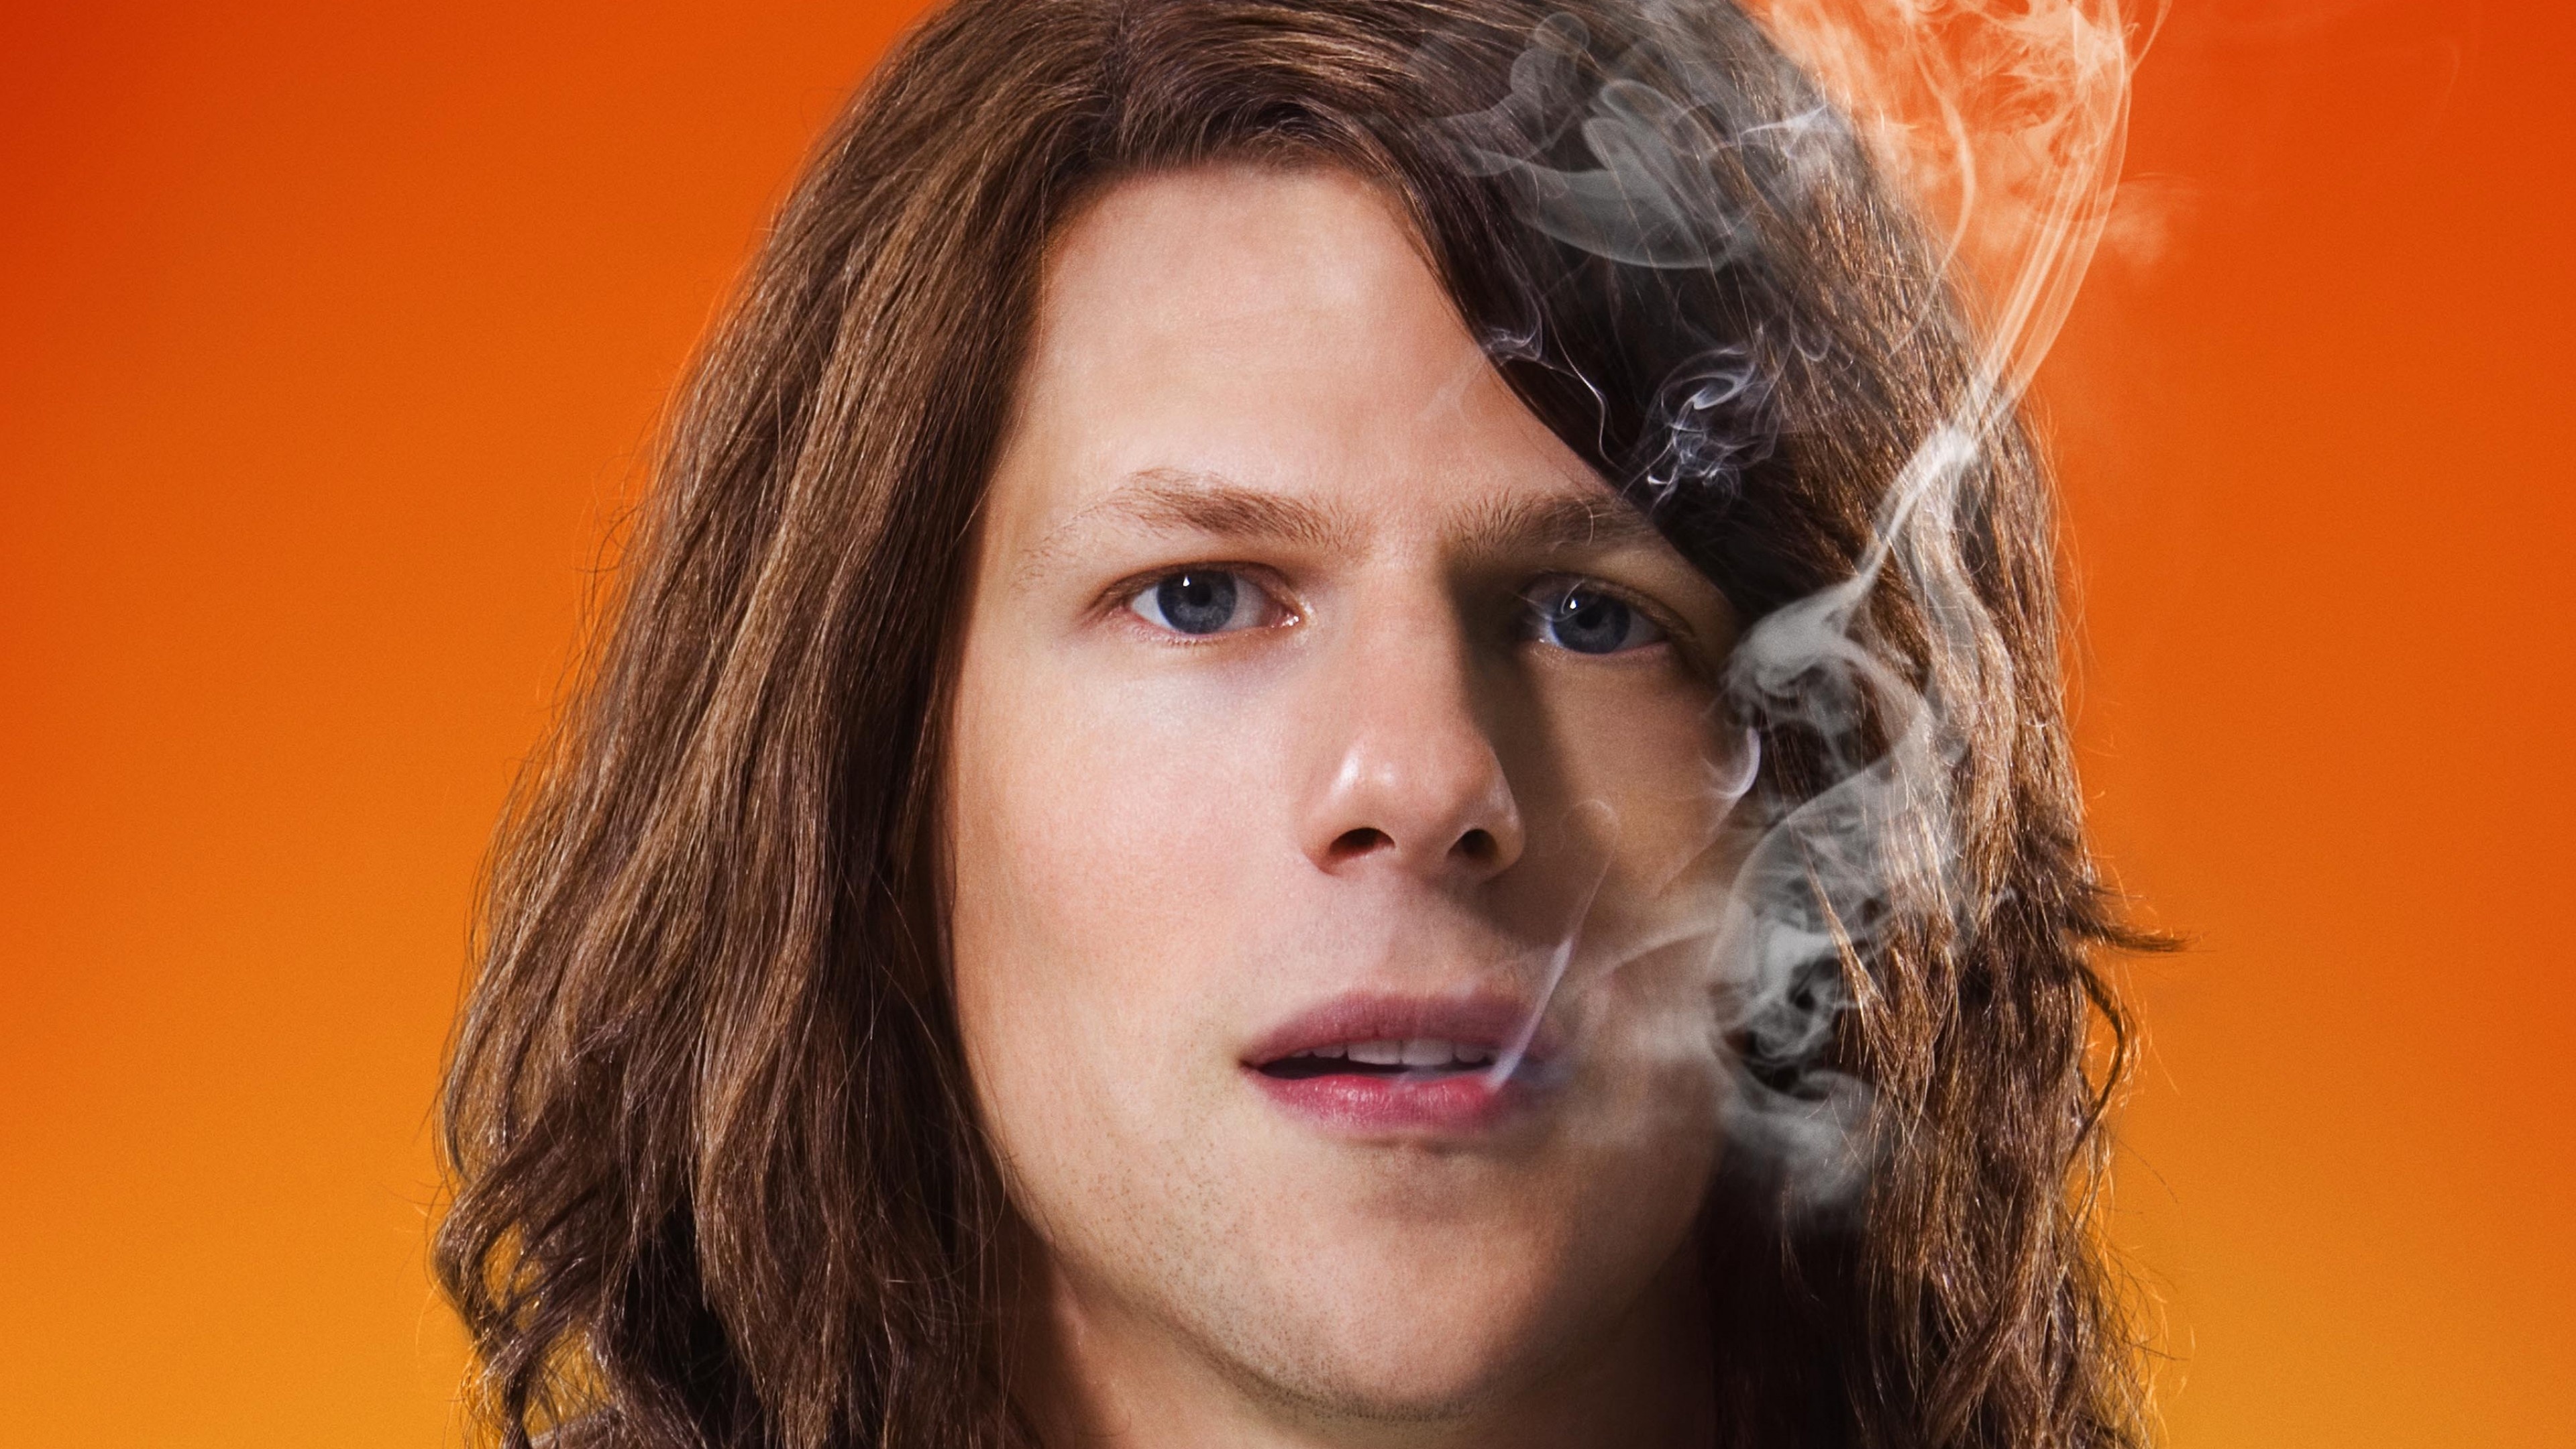 Jesse Eisenberg: Played Mike Howell, a stoner who lives in the sleepy town of Liman, in American Ultra (2015). 3840x2160 4K Wallpaper.